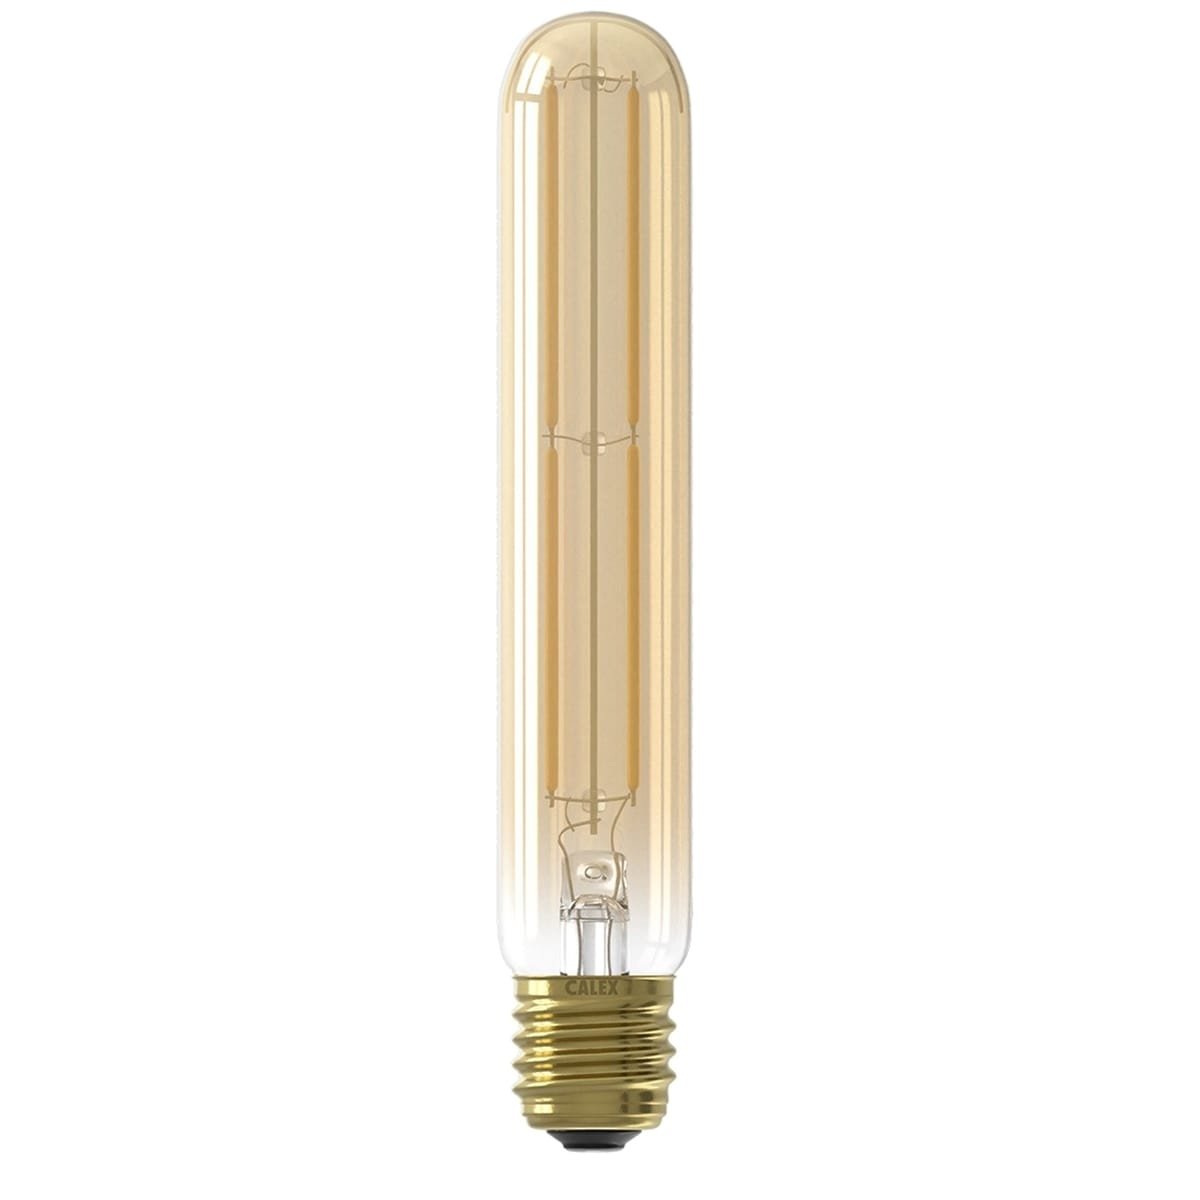 Outdoor Lighting Light Sources Led tube lamp filament Gold - 4W